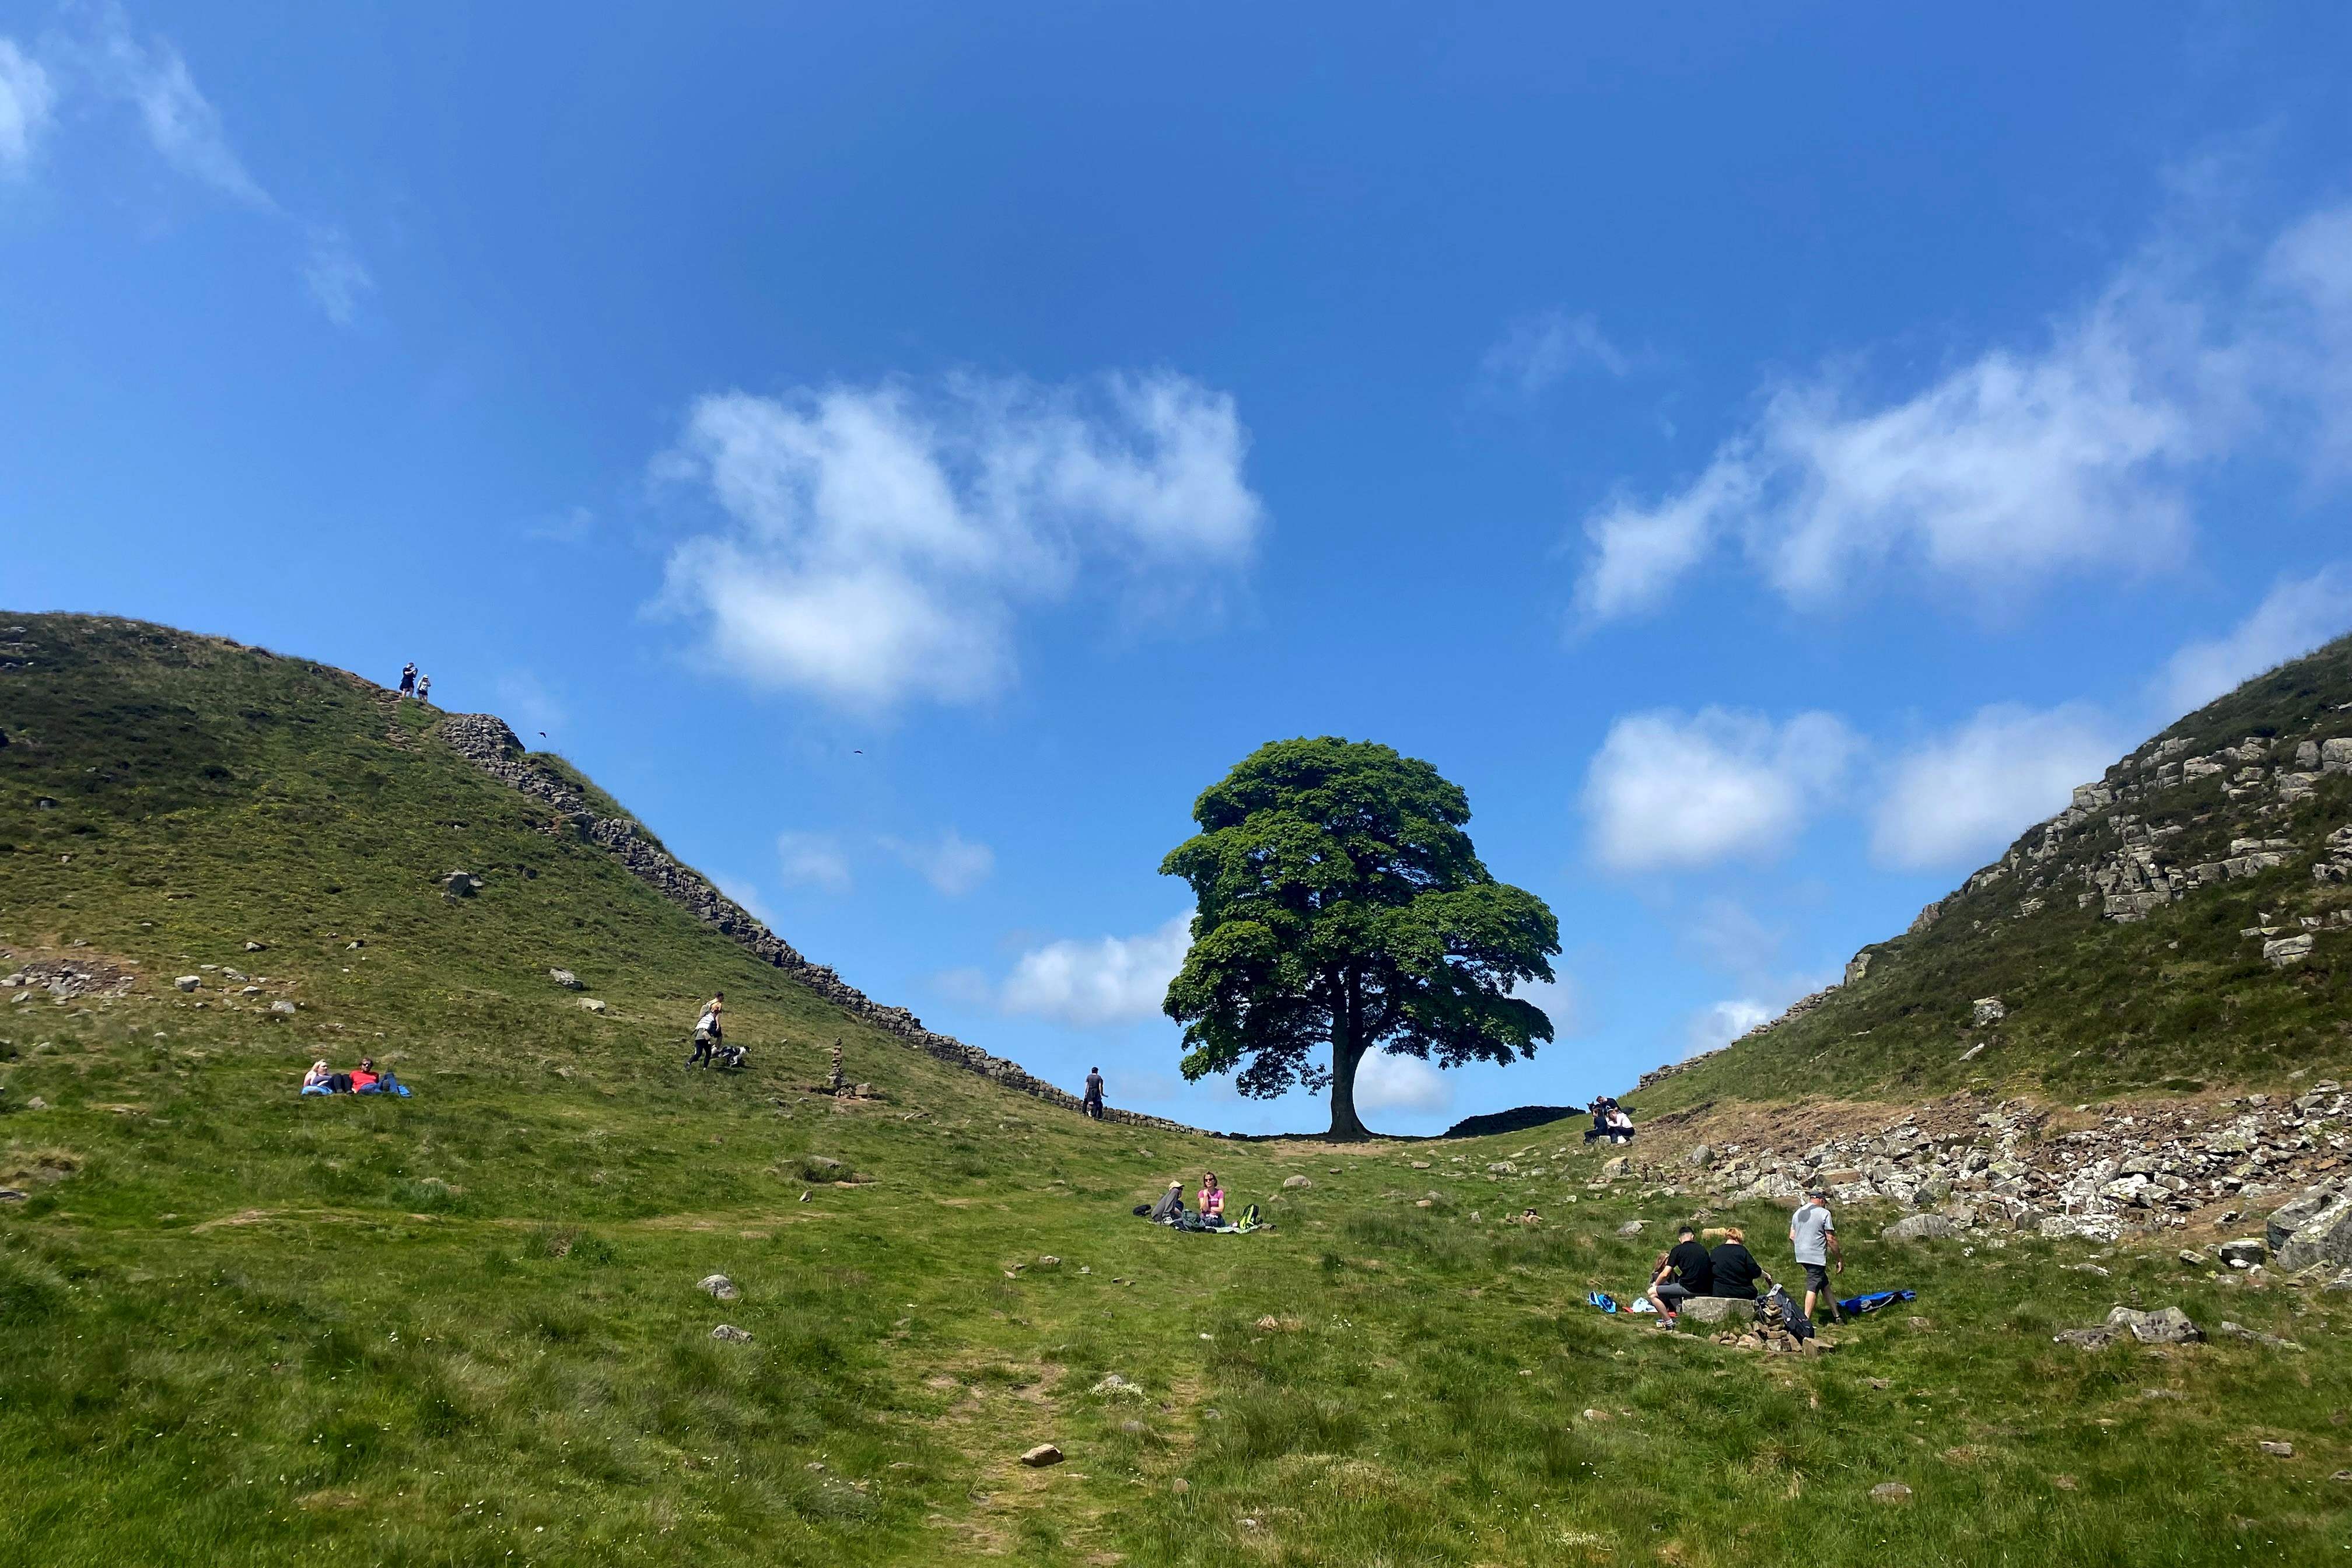 The Sycamore Gap tree, next to Hadrian’s Wall in Northumberland, thought to be around 300 years old, was one of the most photographed trees in the UK